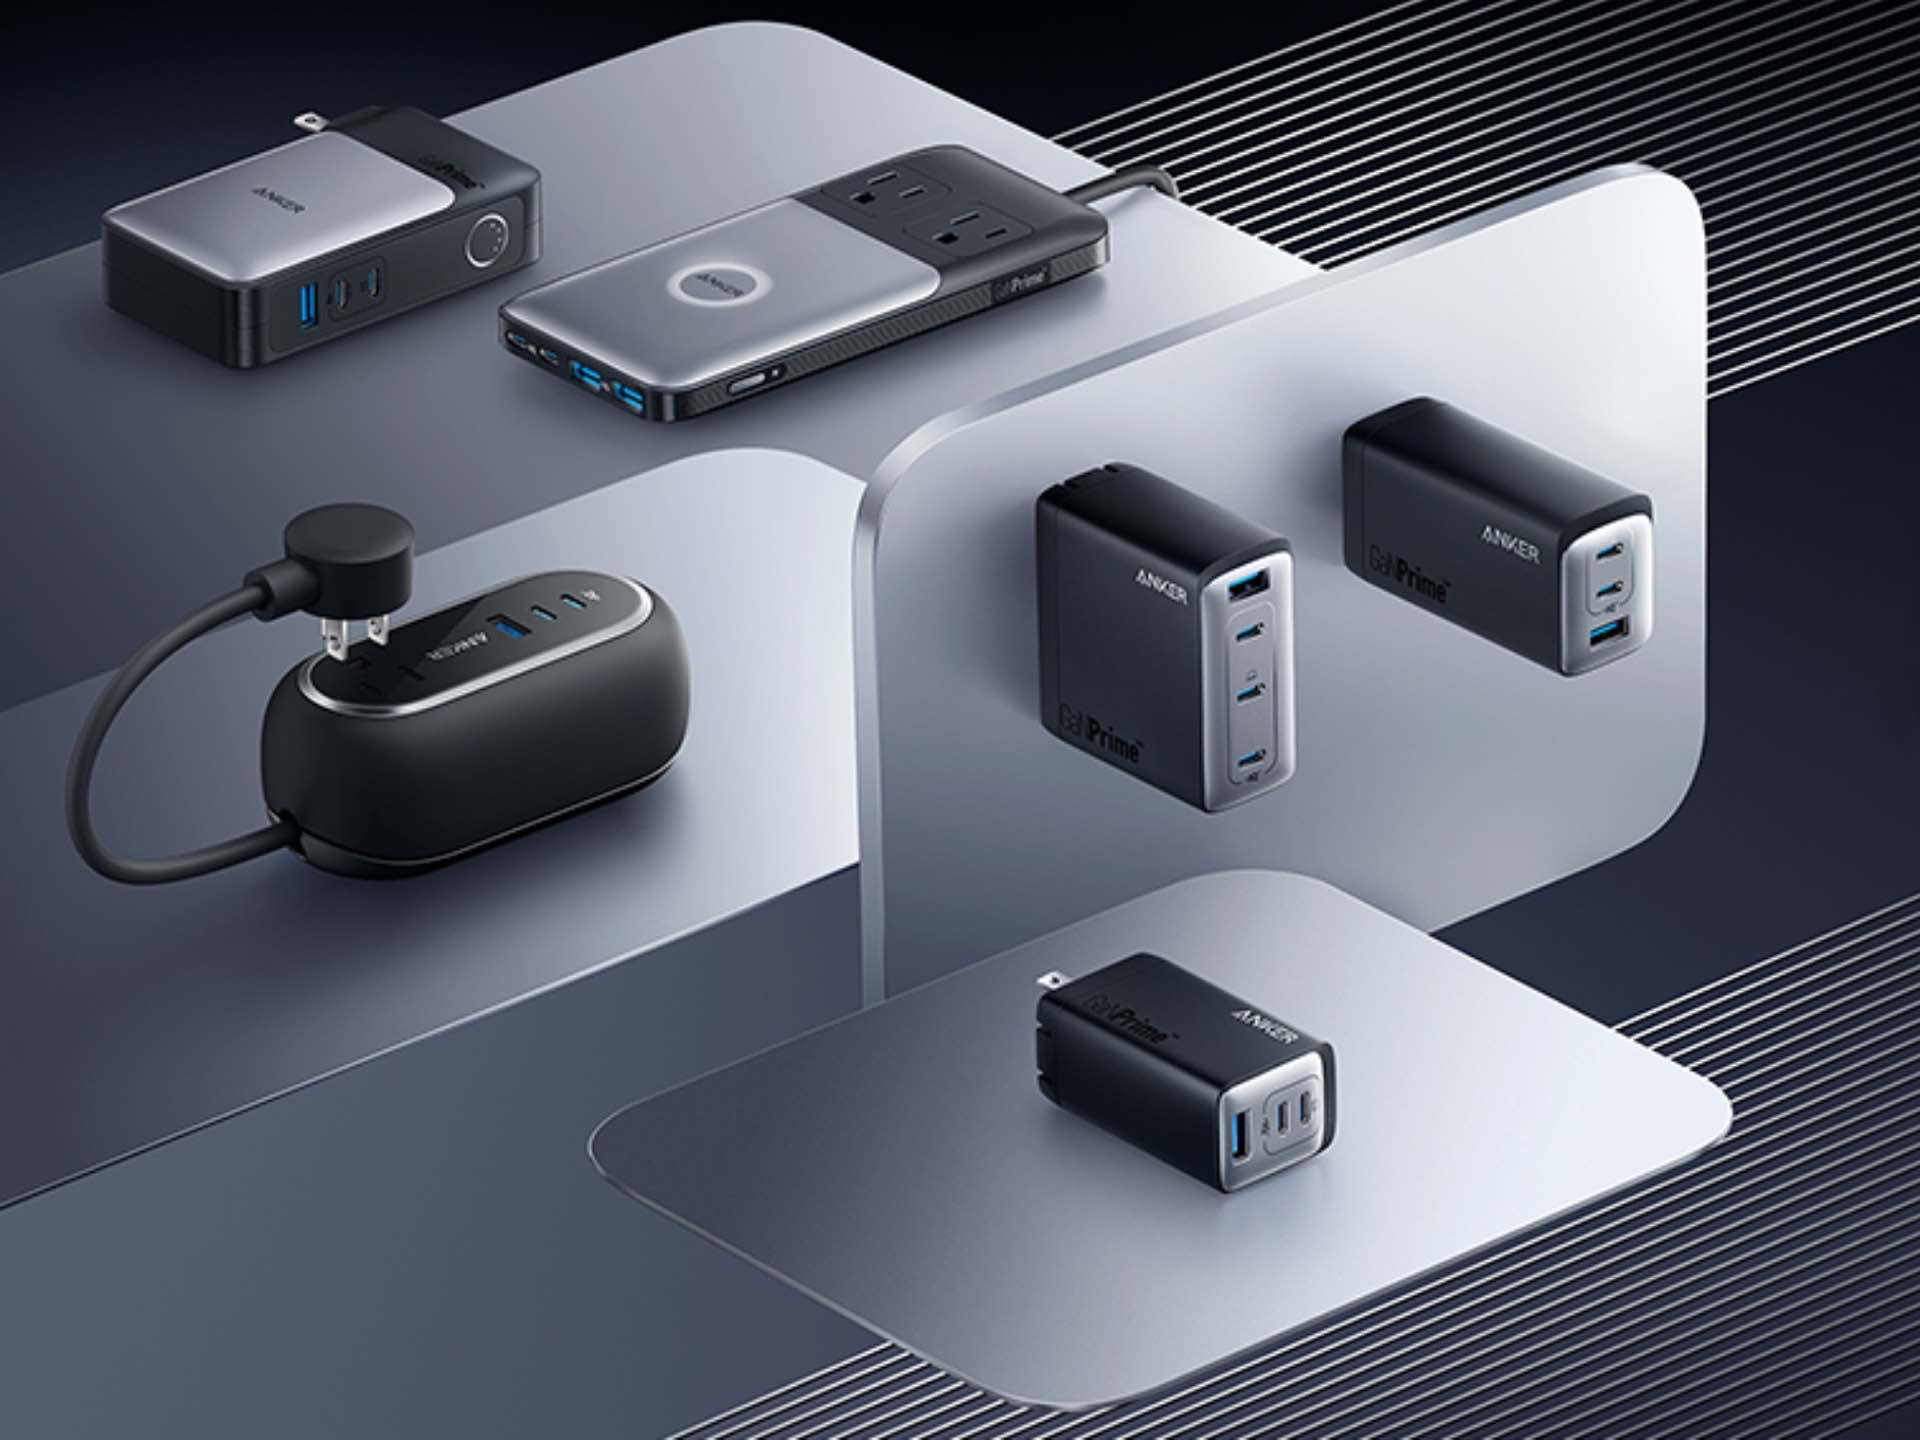 anker-ganprime-multi-device-chargers